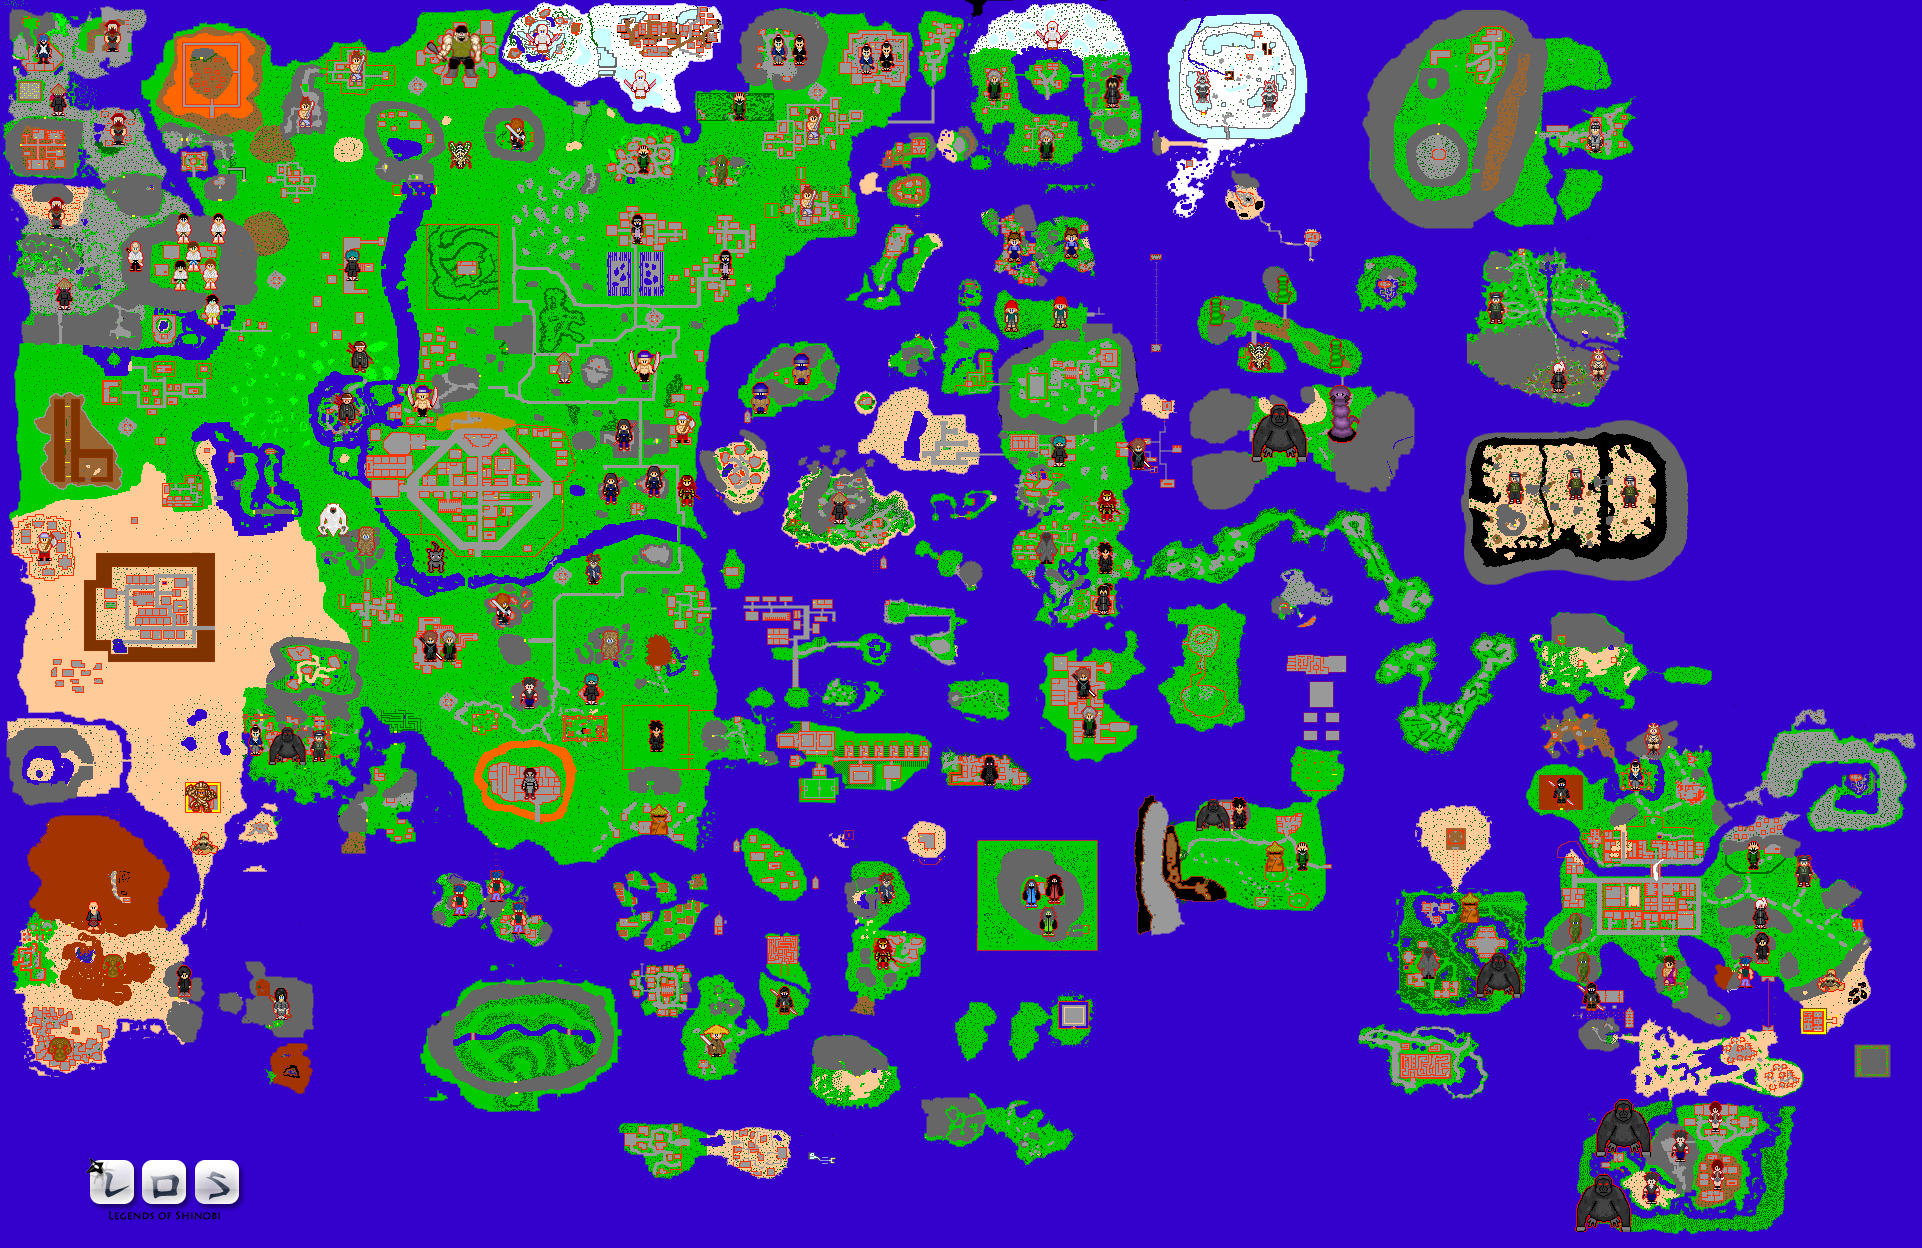 Respawn%20map.png